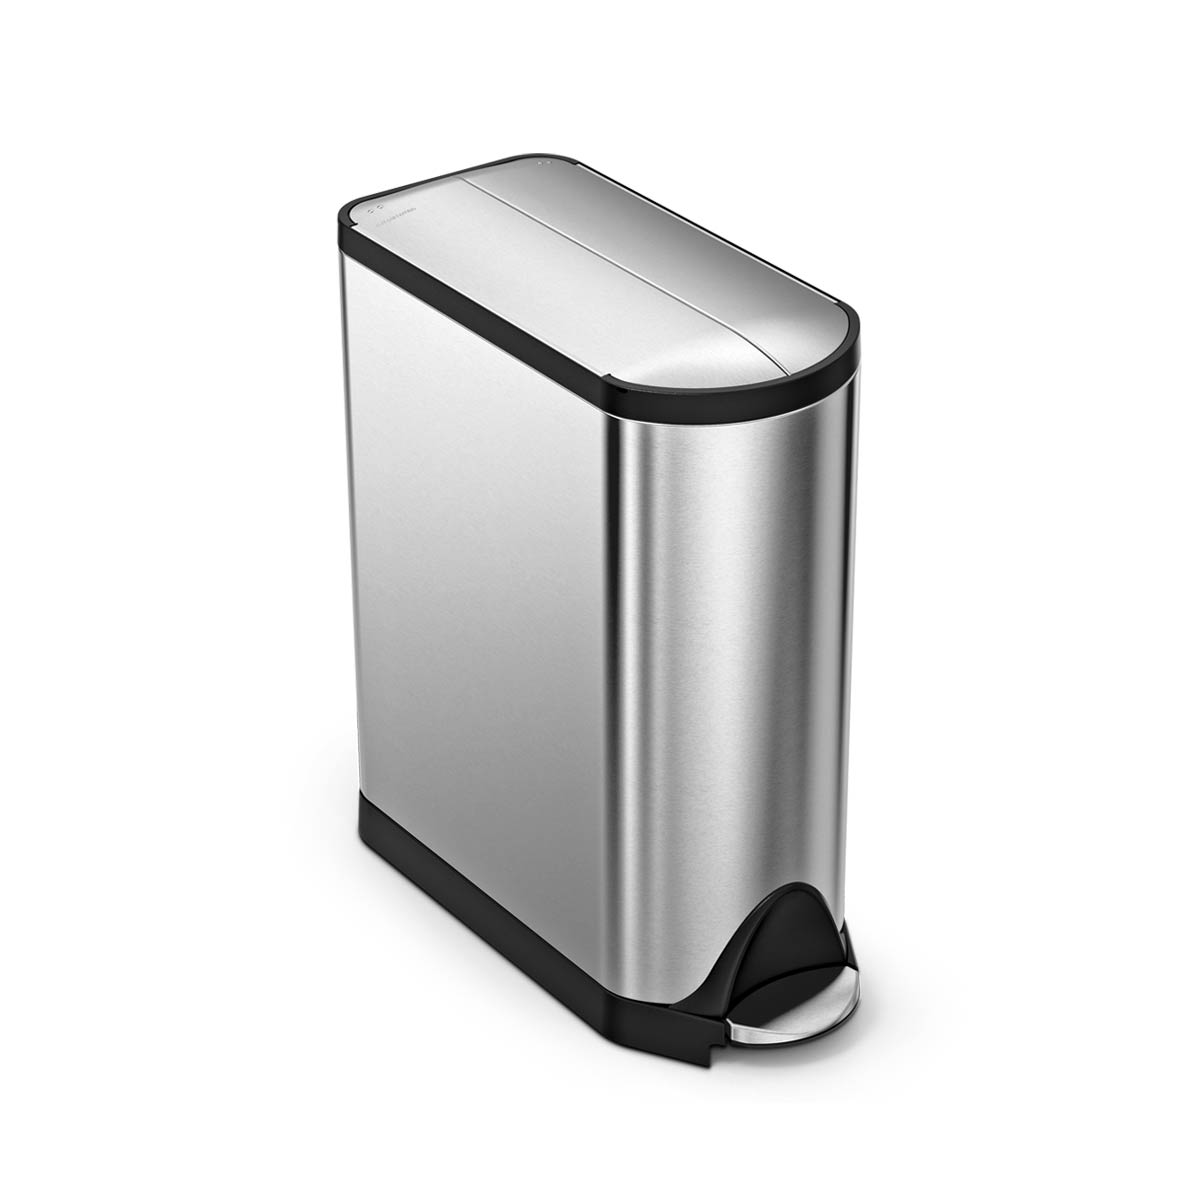 simplehuman 45 Liter Stainless Steel Sensor Trash Can with Liners